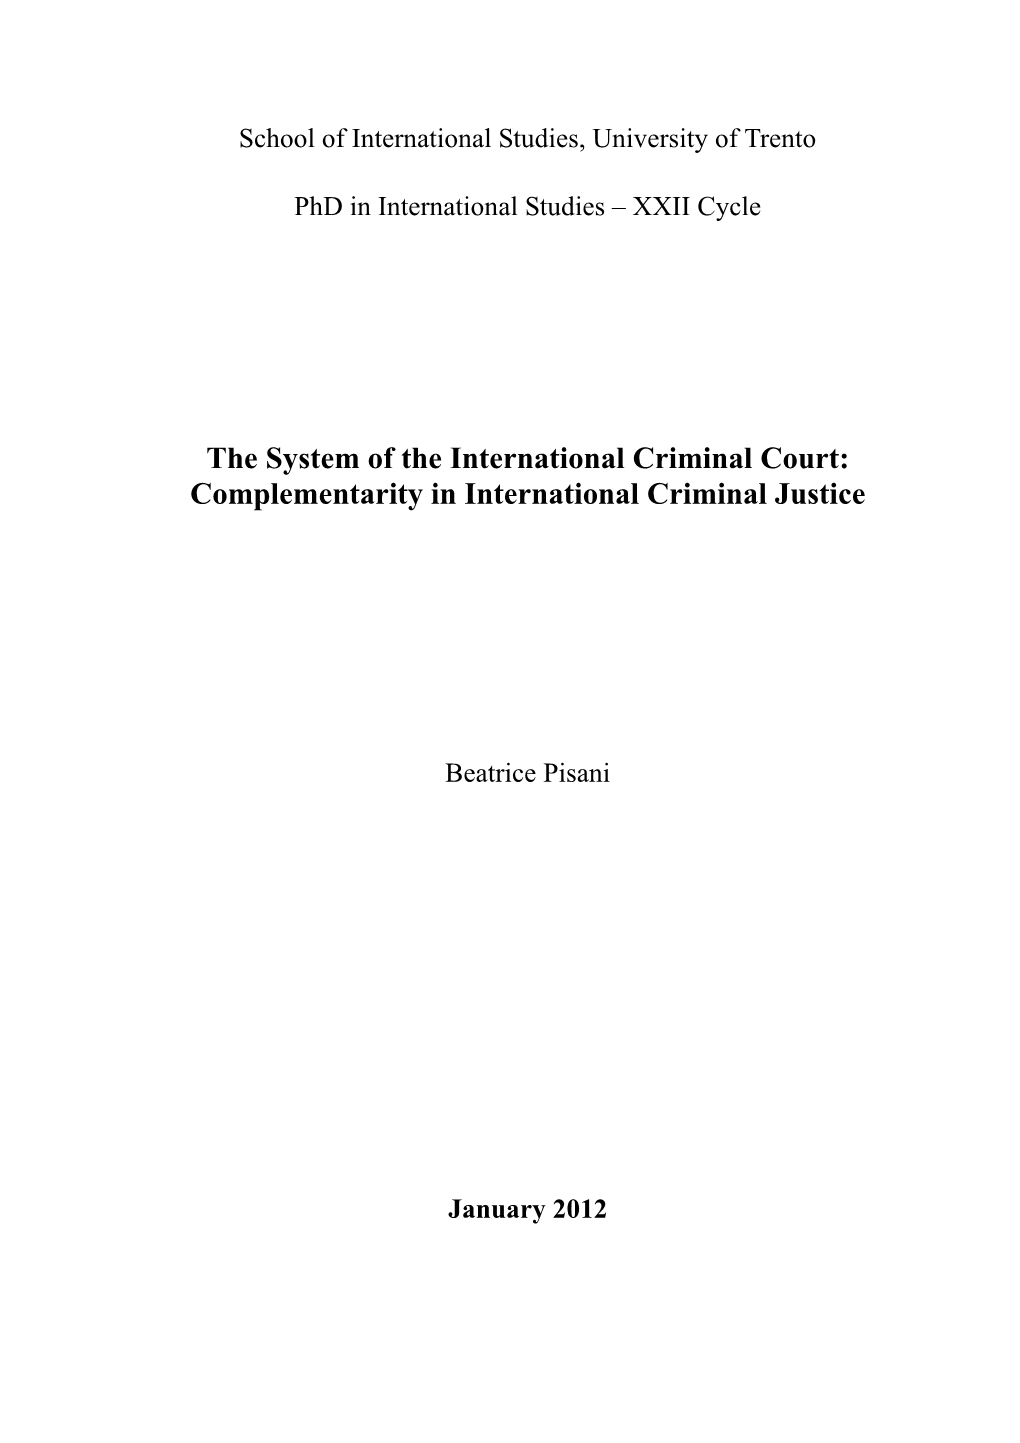 The System of the International Criminal Court: Complementarity in International Criminal Justice